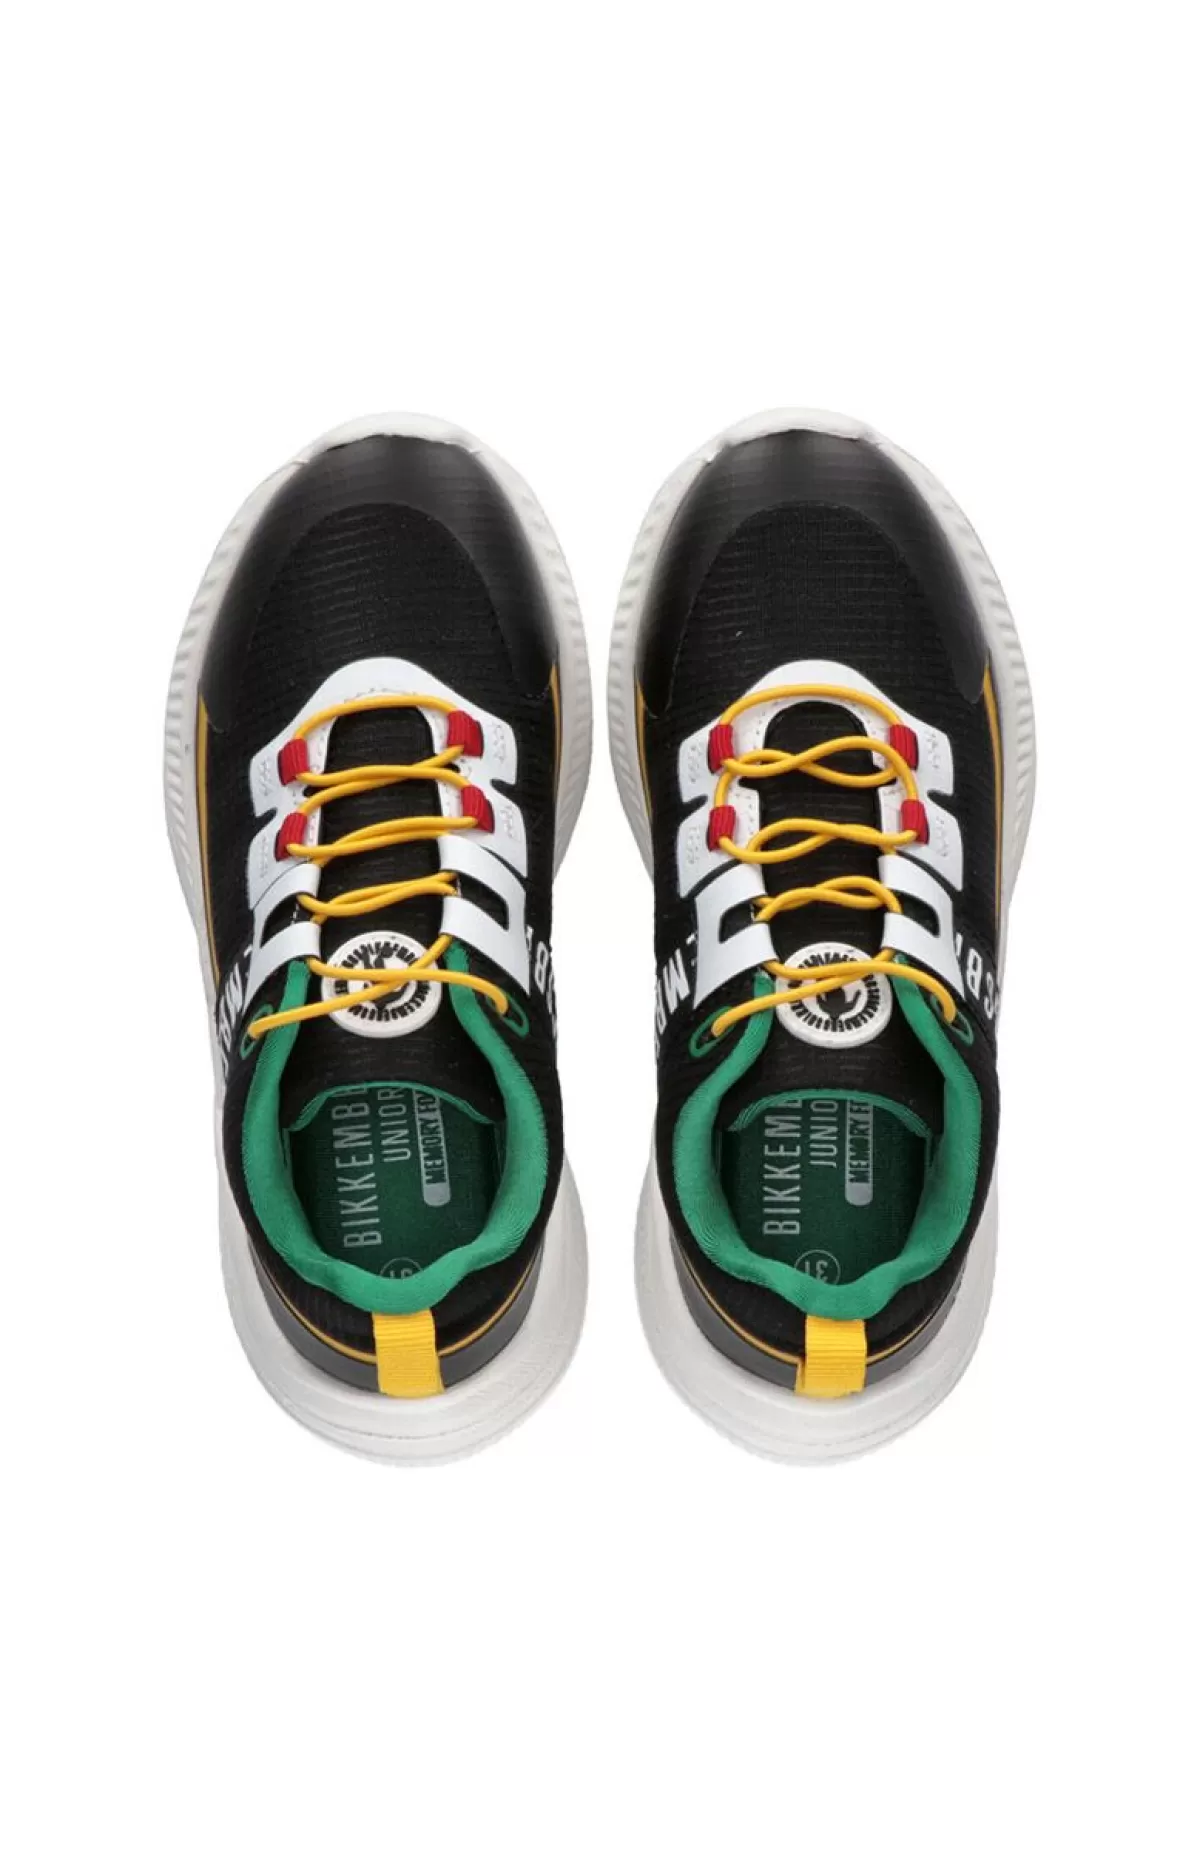 Bikkembergs Boys' Multi Color Chunky Sneakers - Spike Black Clearance